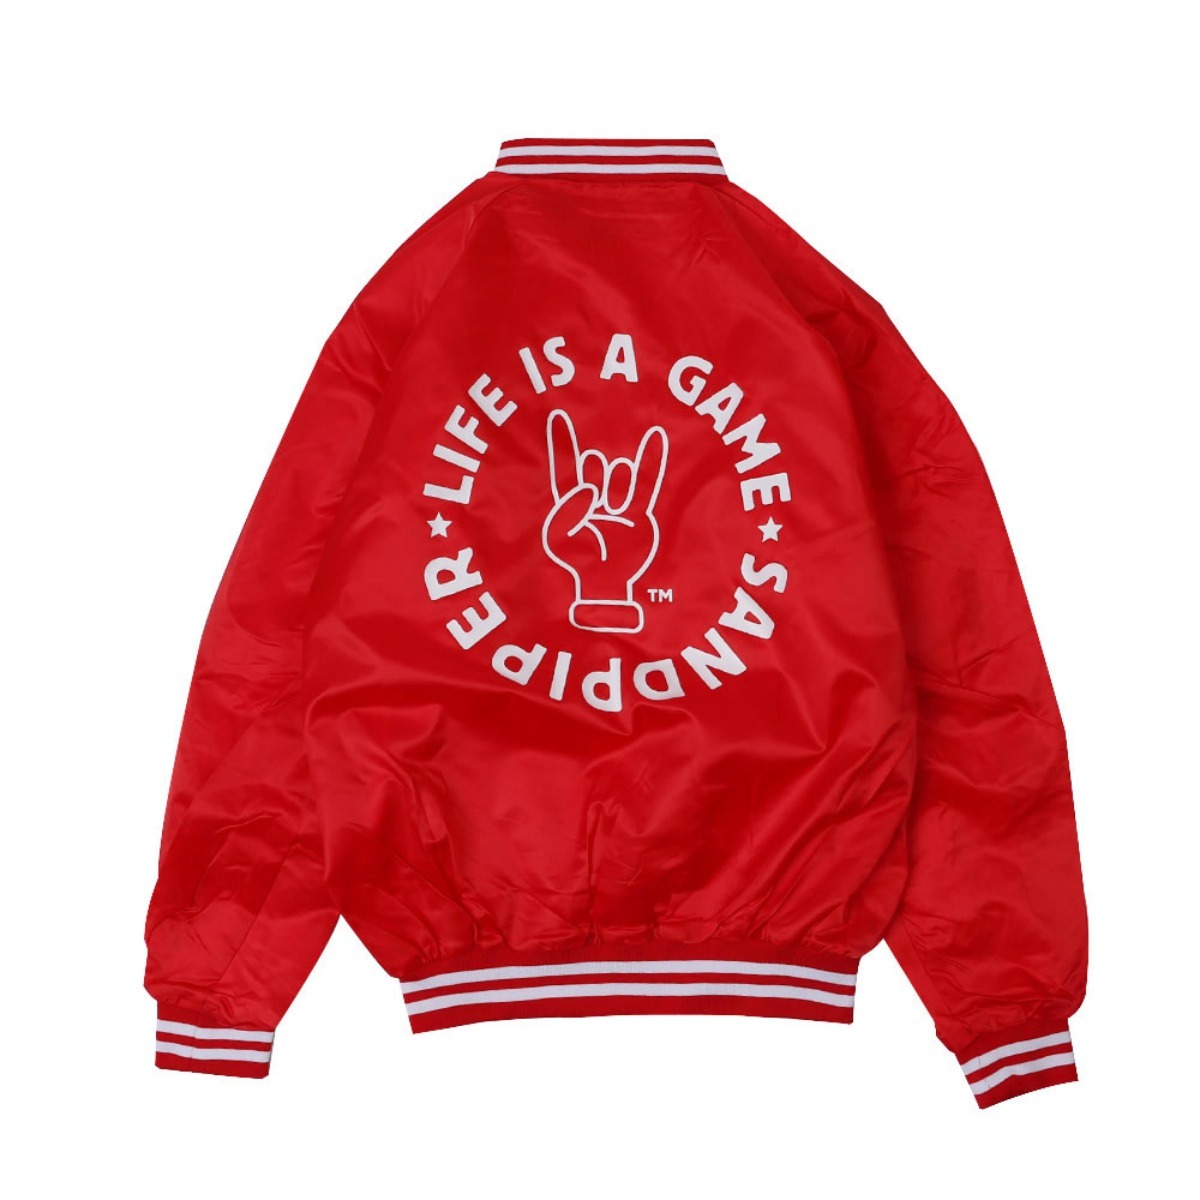 LIFE IS A GAME BASEBALL JACKET (Red CARDINAL ACTIVE WEAR)